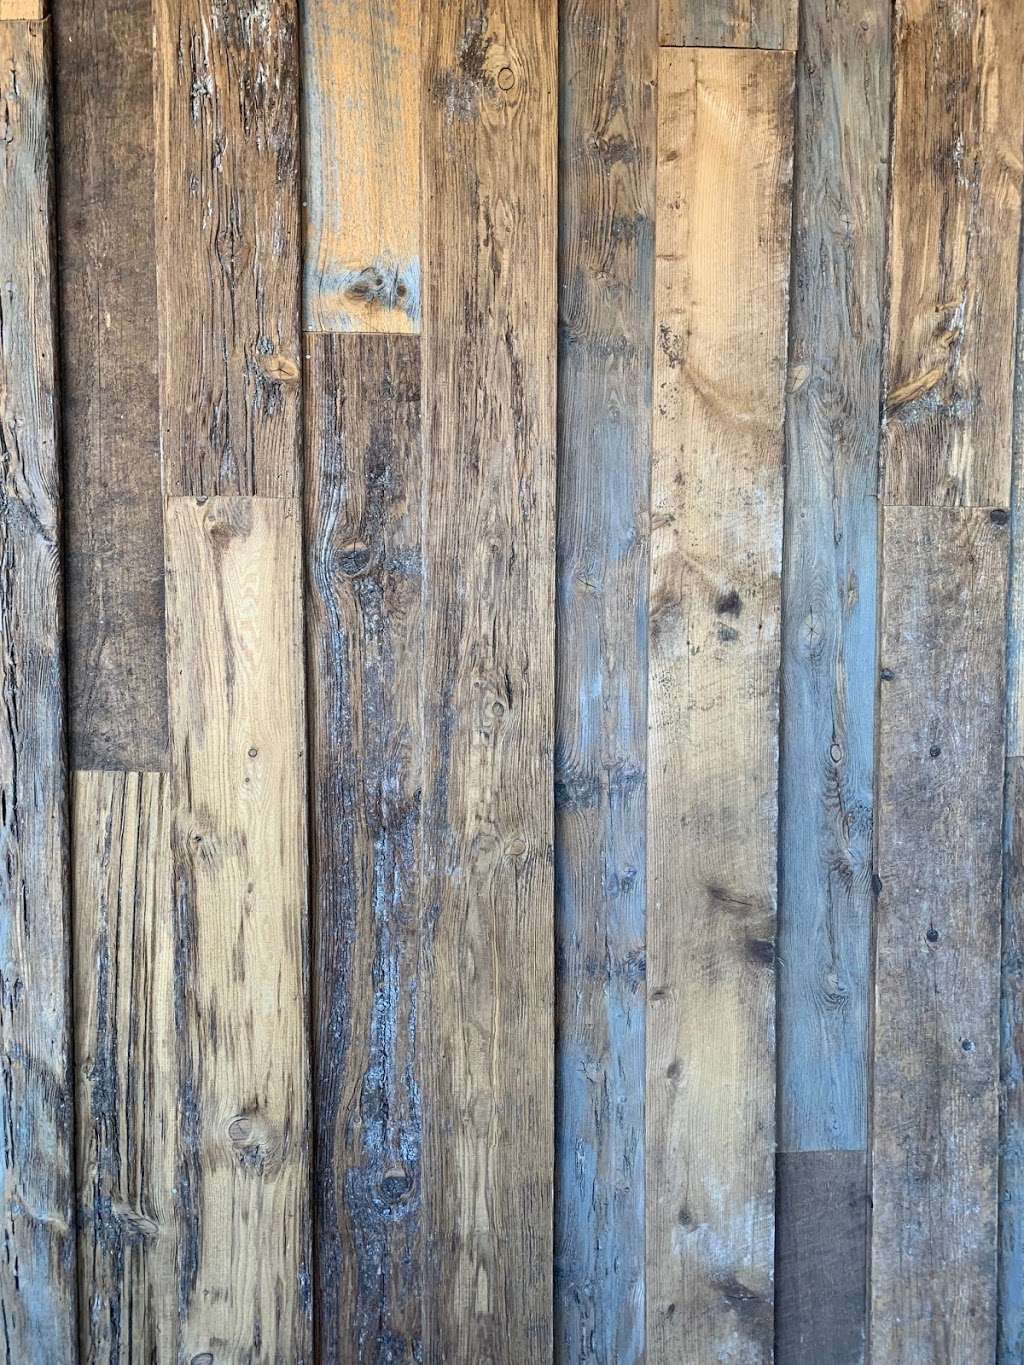 Telluride Natural Stone and Reclaimed Wood | 1639 E Deer Valley Dr, Phoenix, AZ 85024, USA | Phone: (480) 398-2999